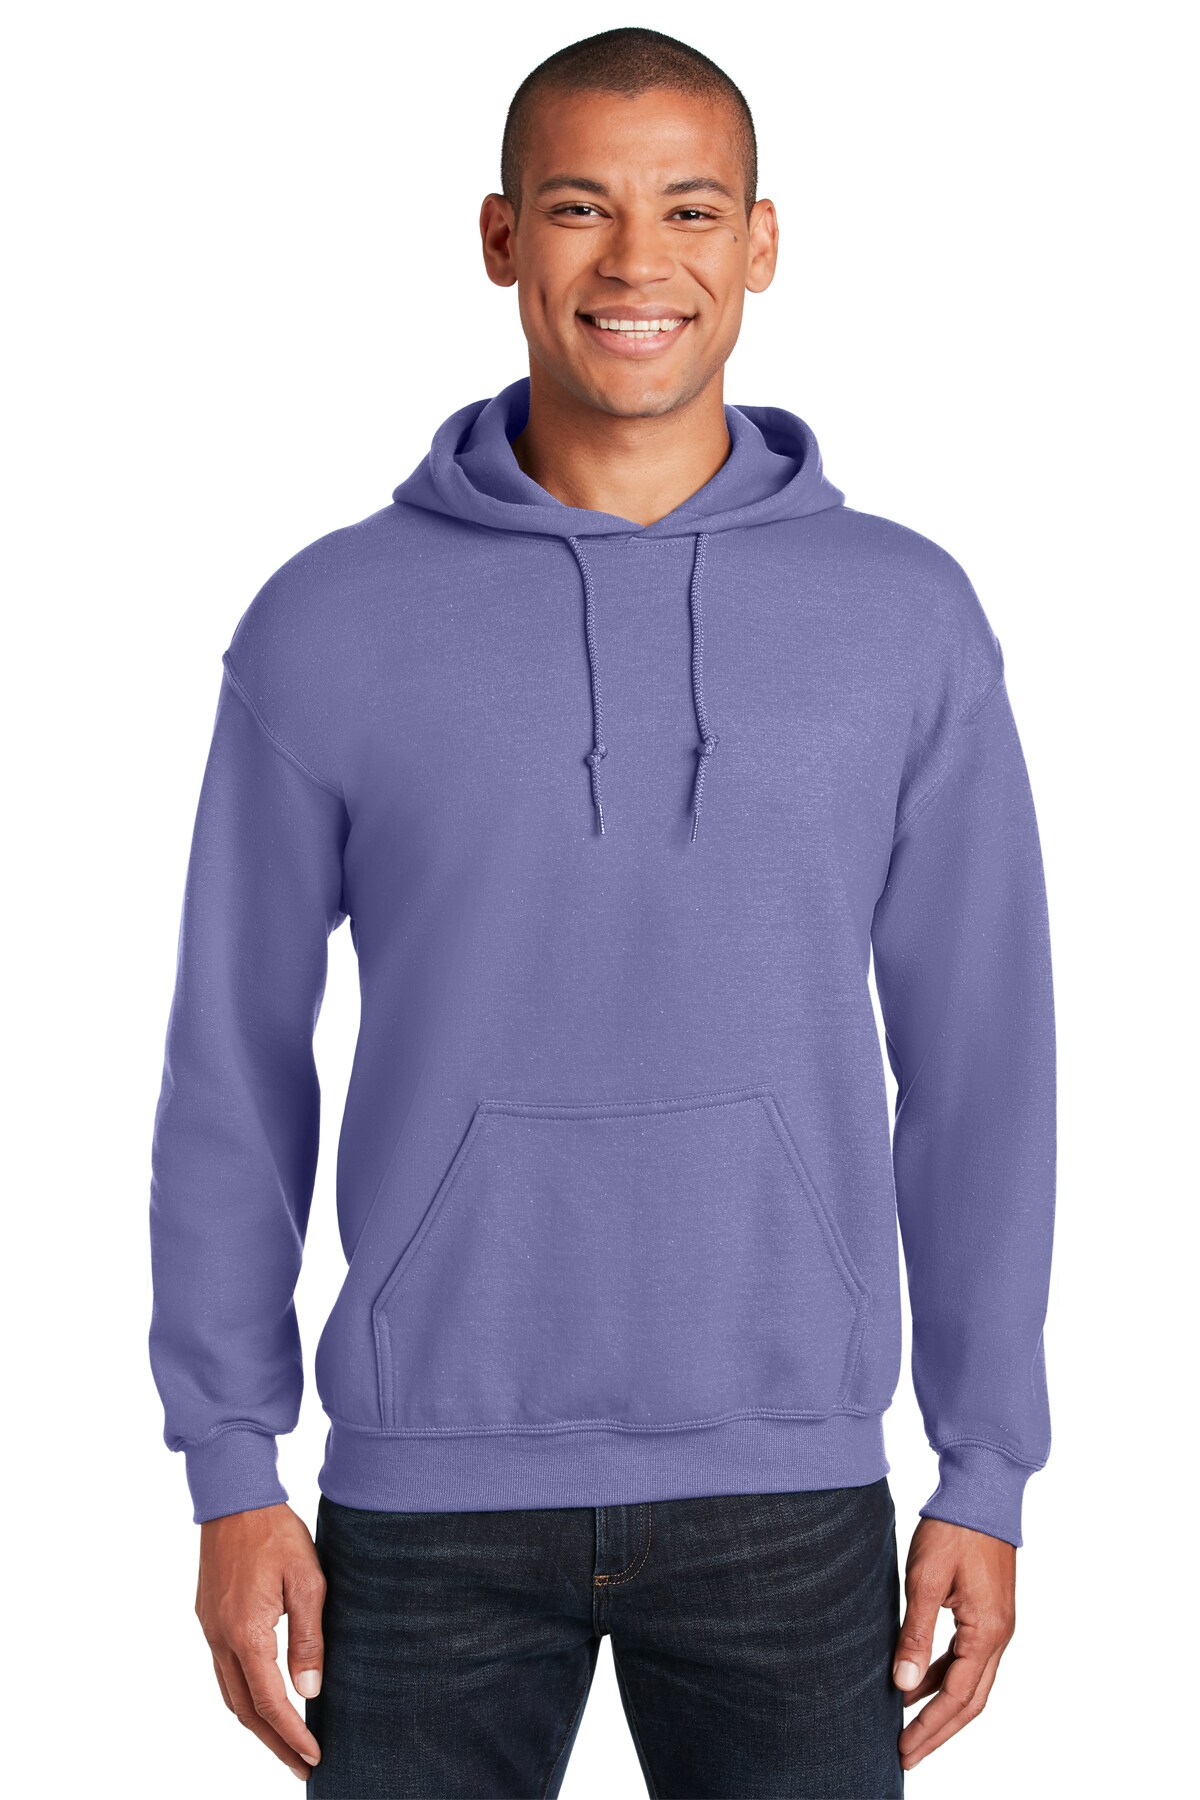 Gildan® - Heavy Blend Hooded Sweatshirt - 18500, 8-Ounce Cotton/Poly  Fabrication for Ultimate Comfort and Style, Experience the luxury of  coziness with the Gildan Heavy Blend Hooded Sweatshirt